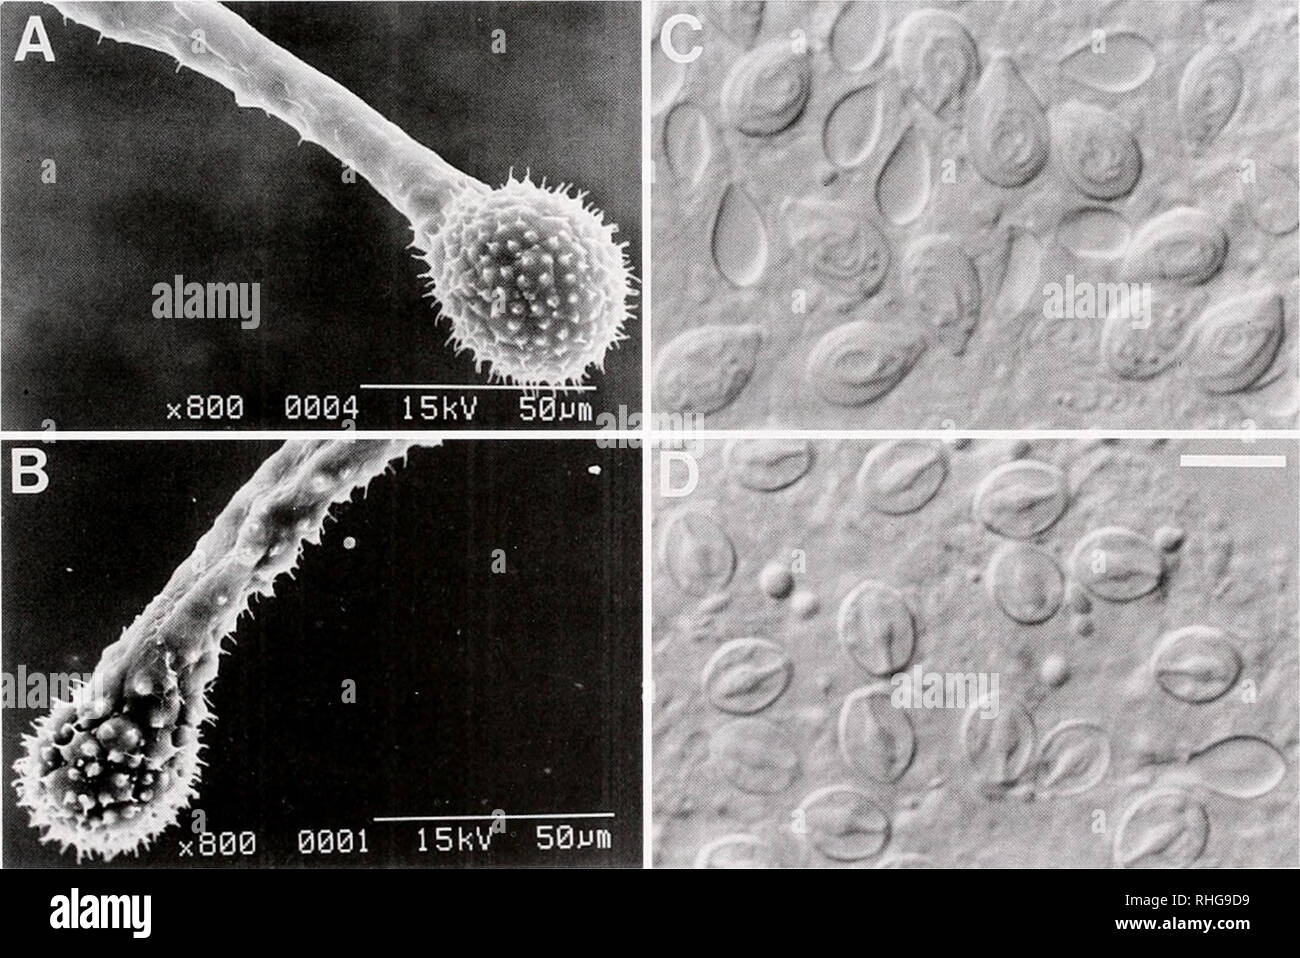 . The Biological bulletin. Biology; Zoology; Biology; Marine Biology. ACTINULAR BEHAVIOR AND NEMATOCYTES 263 of 3-week-old films. Thus, microbial films significantly (P &lt; 0.0001) promoted actinular settlement. These larval responses did not occur without direct contact of the aboral tentacles to the microbial-filmed surface. Three days after liberation, juvenile polyps showed the following characteristics: aboral tentacle length, 600-1300 jum (mean ± standard deviation = 800.8 ± 187.2); oral tentacle length, 73-120 /urn (89.0 ± 17.3); body length, 433-968 /Ltm (660.9 ± 186.6); body width, 1 Stock Photo